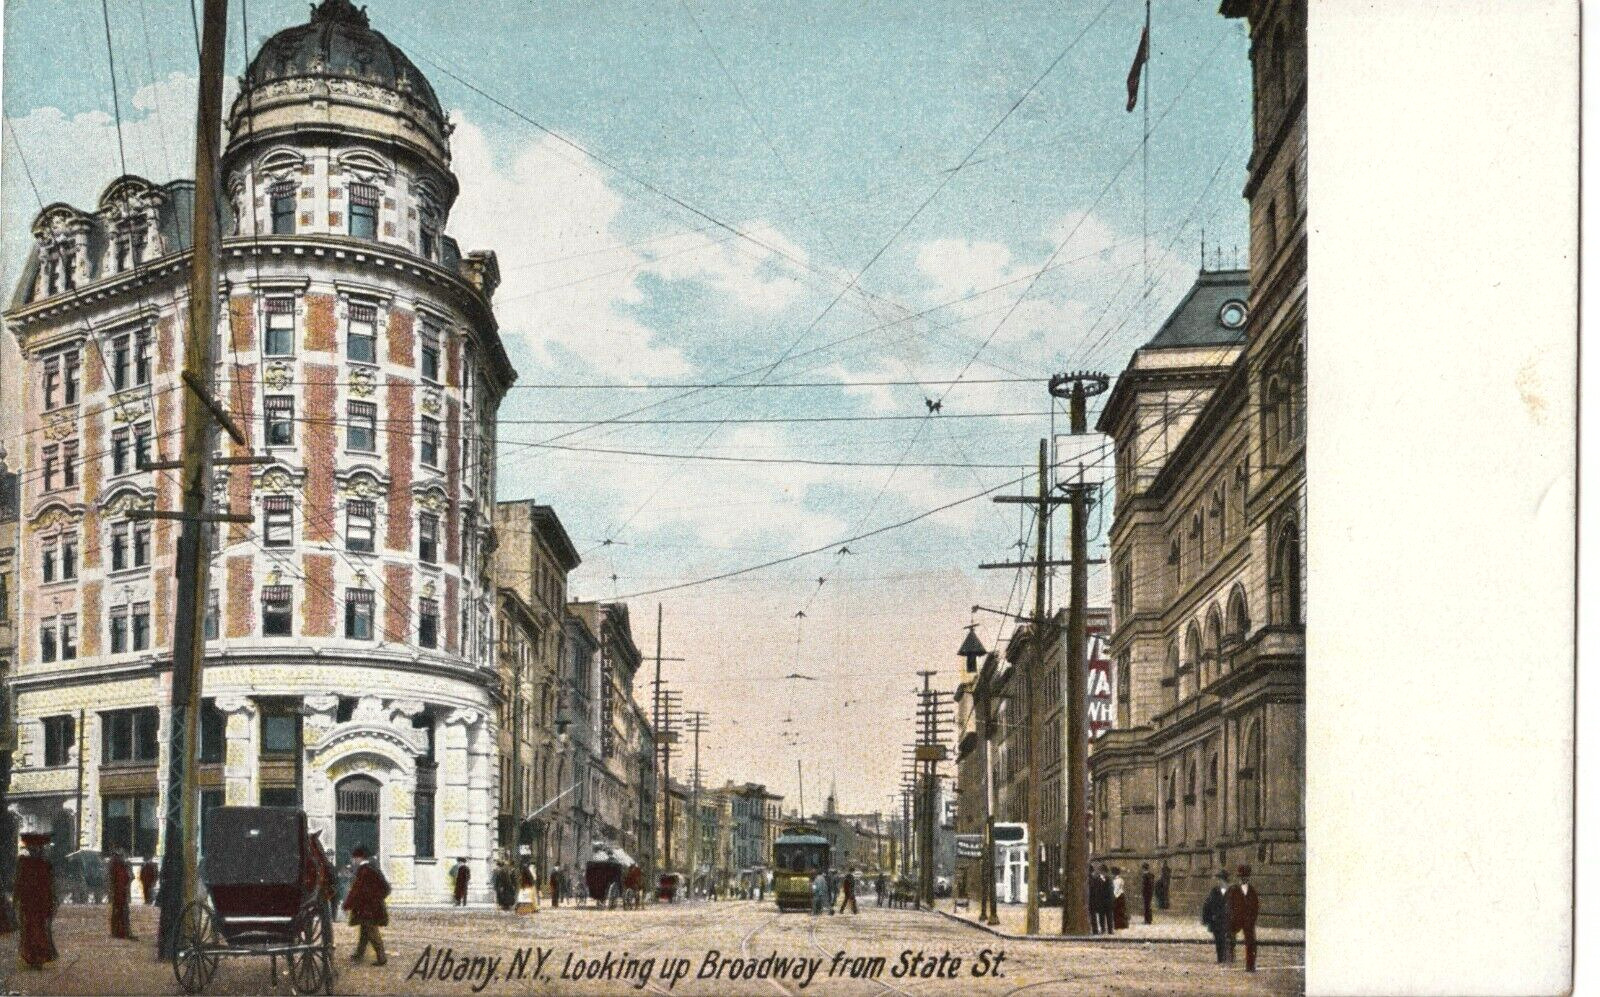 Broadway Street From State Street-Albany, New York NY-antique unposted postcard